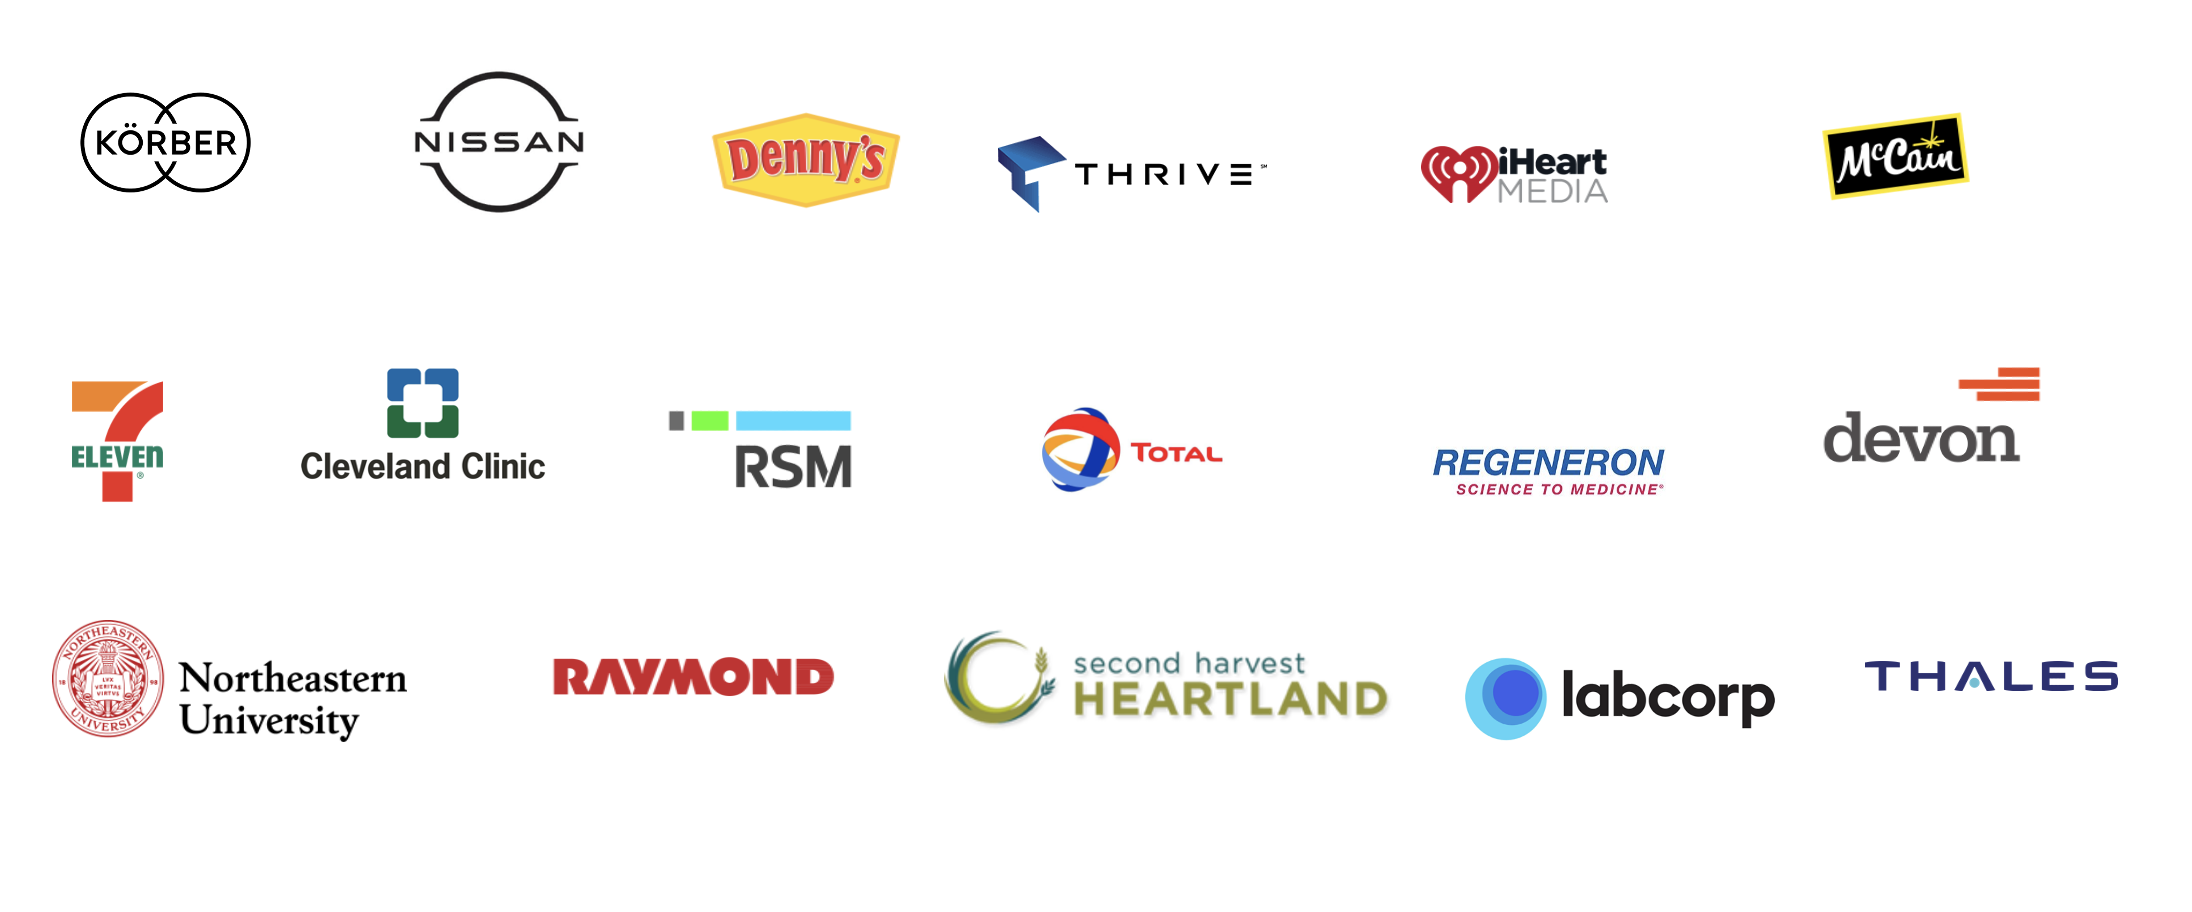 3CLogic - Trusted by leading brands around the world